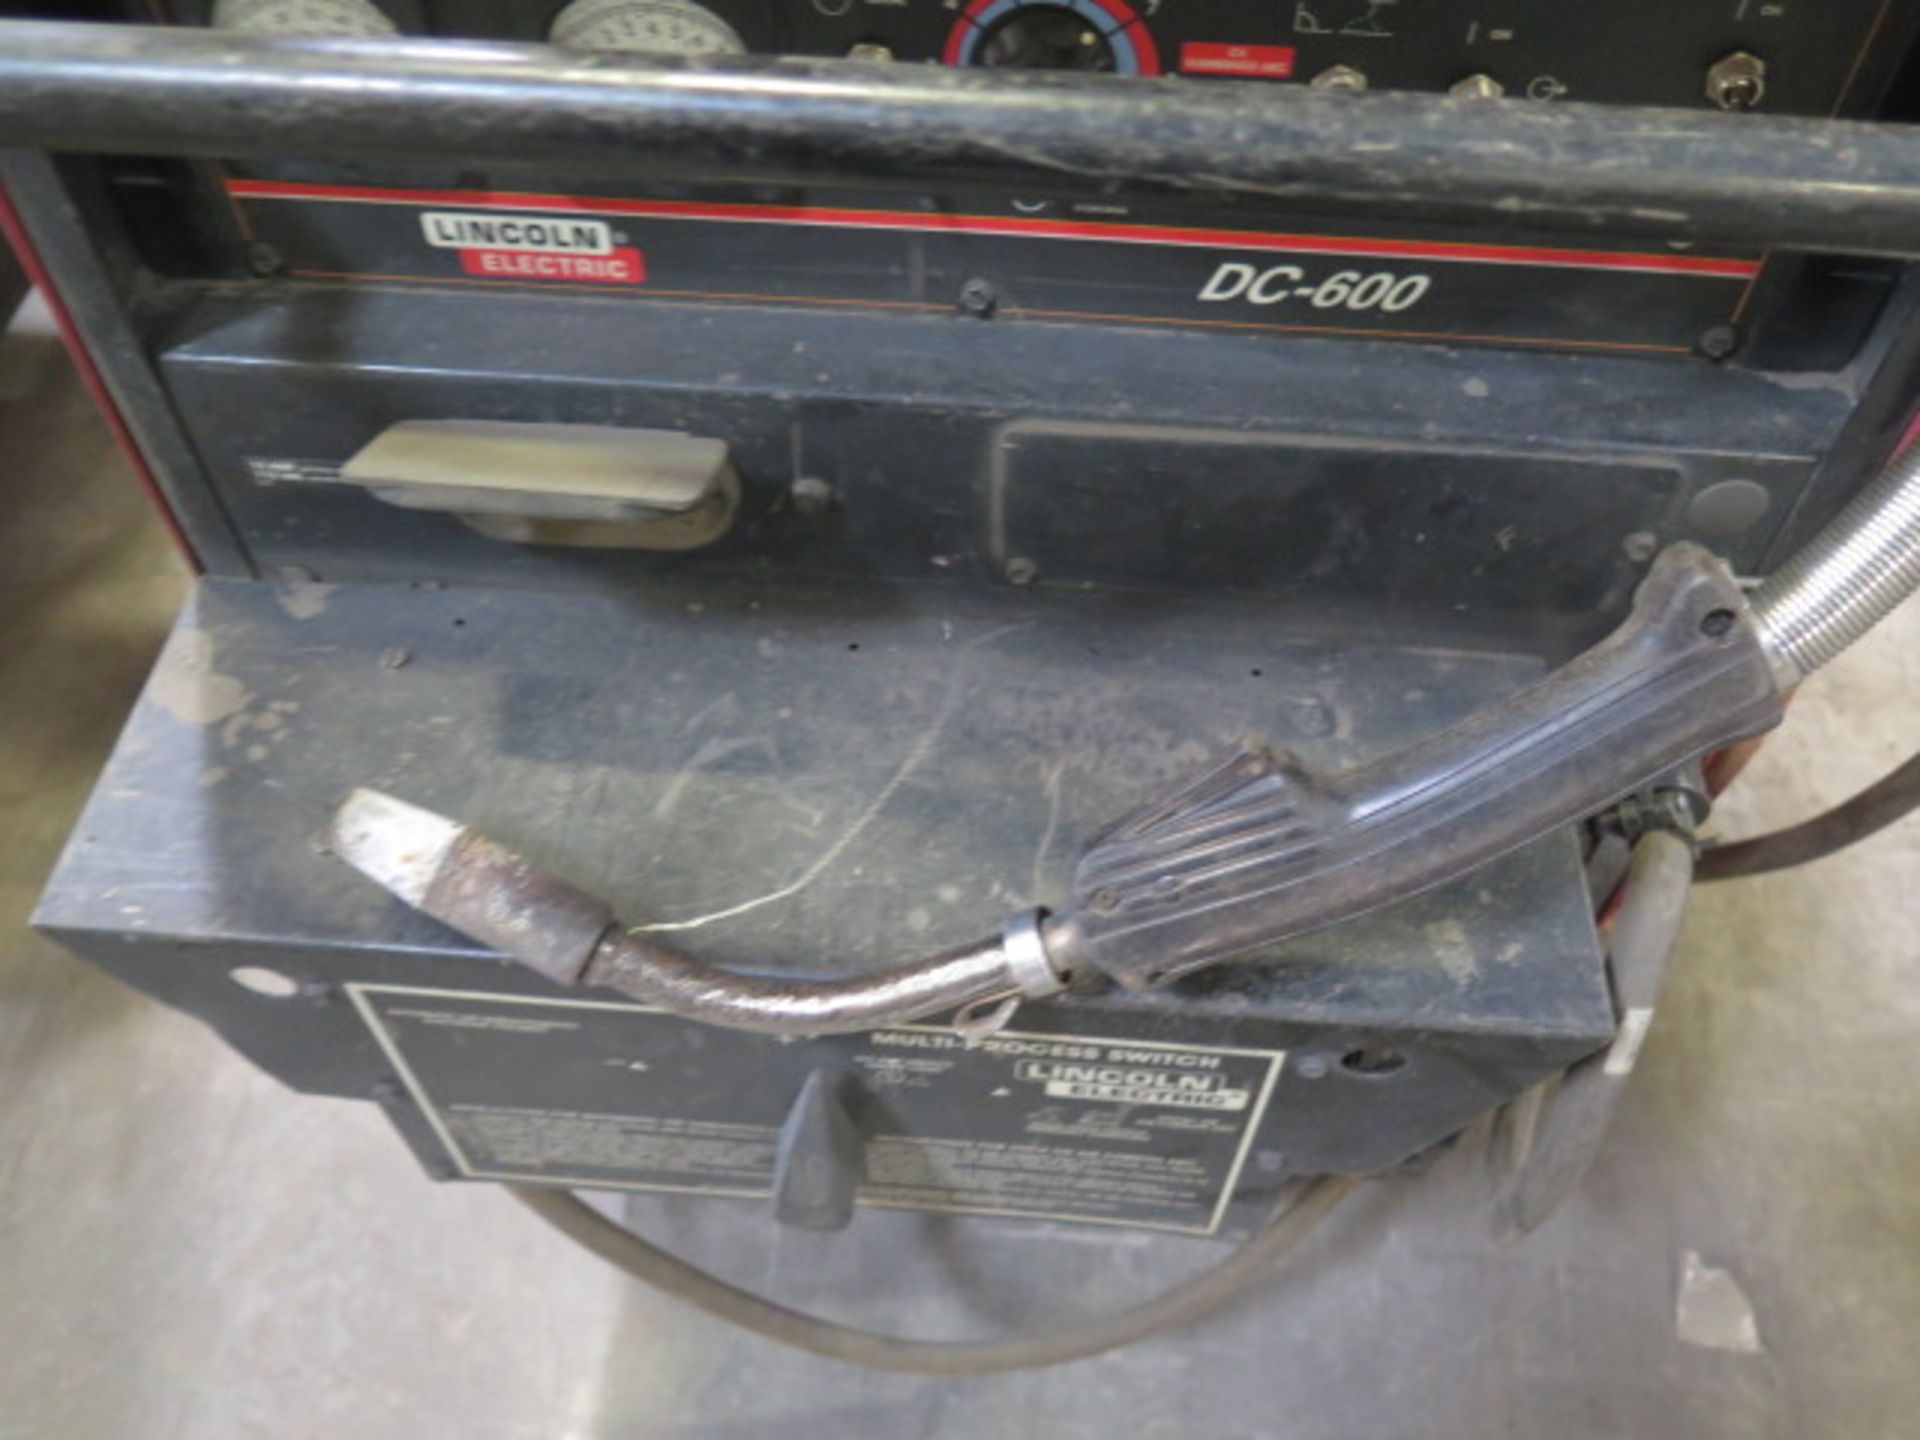 Lincoln DC-600 Arc Welding s/n U1041206274 w/ Multi-Process Switch, Lincoln LN-10, SOLD AS IS - Image 7 of 9